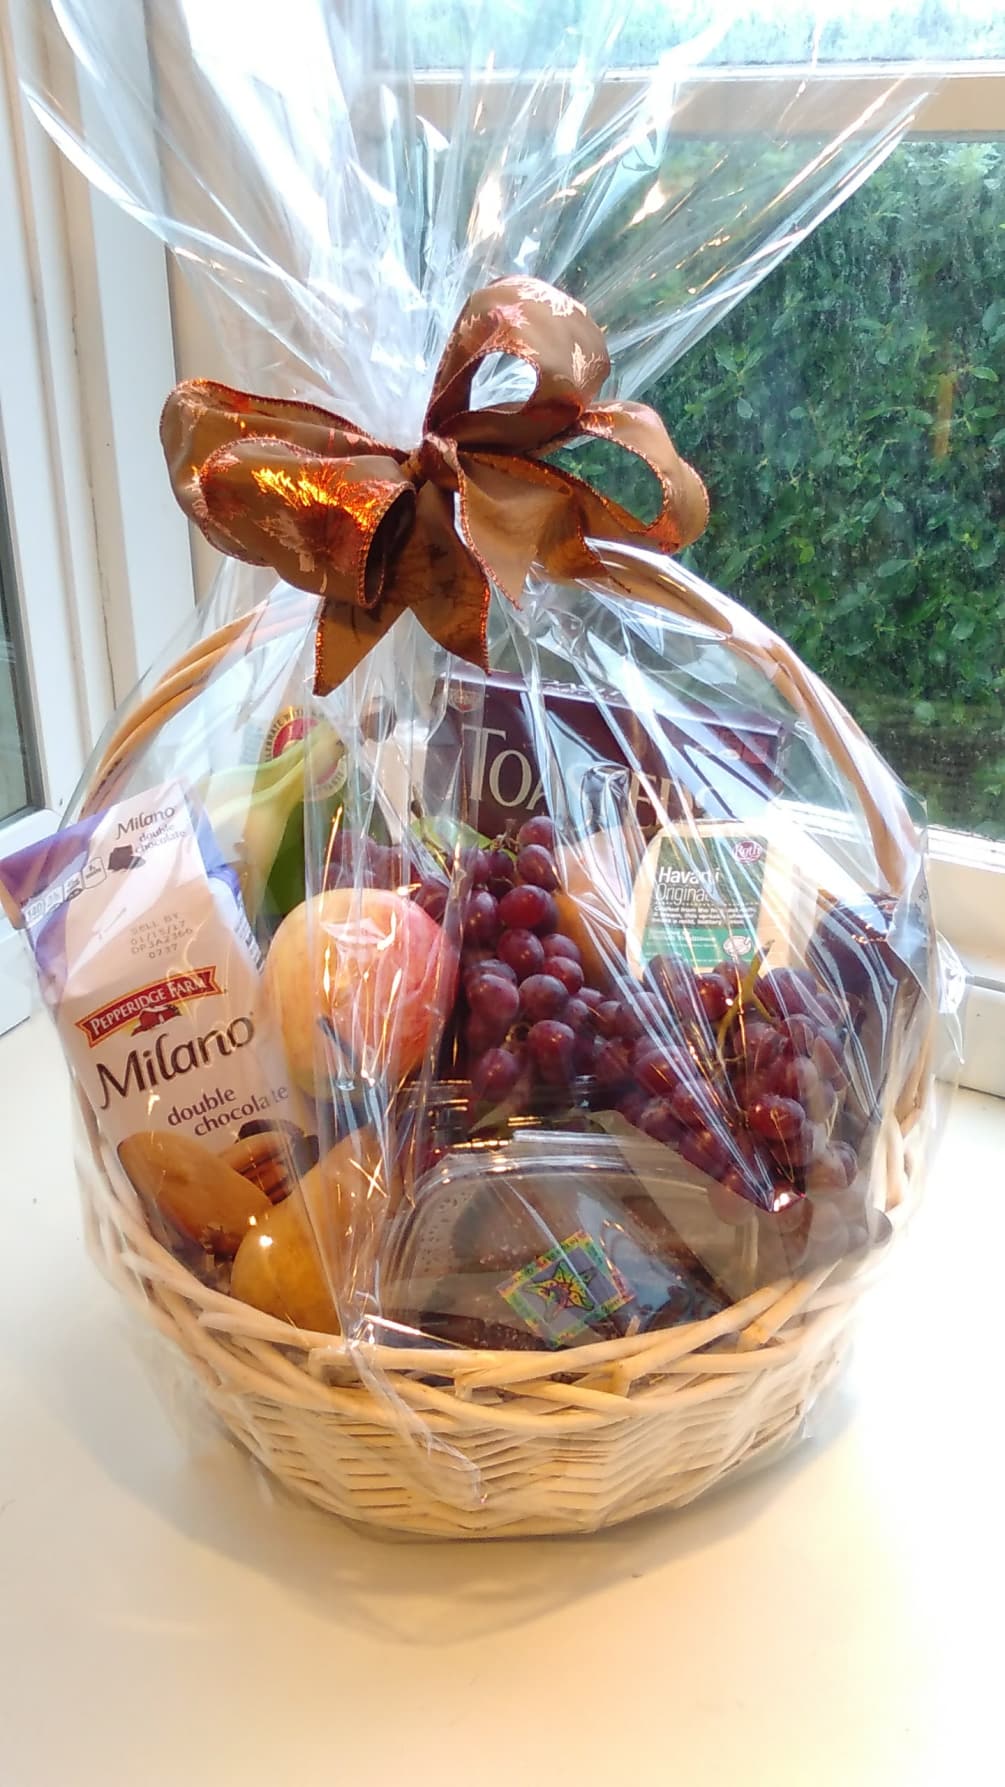 This lovely basket is filled with delectable goodies that are sure to